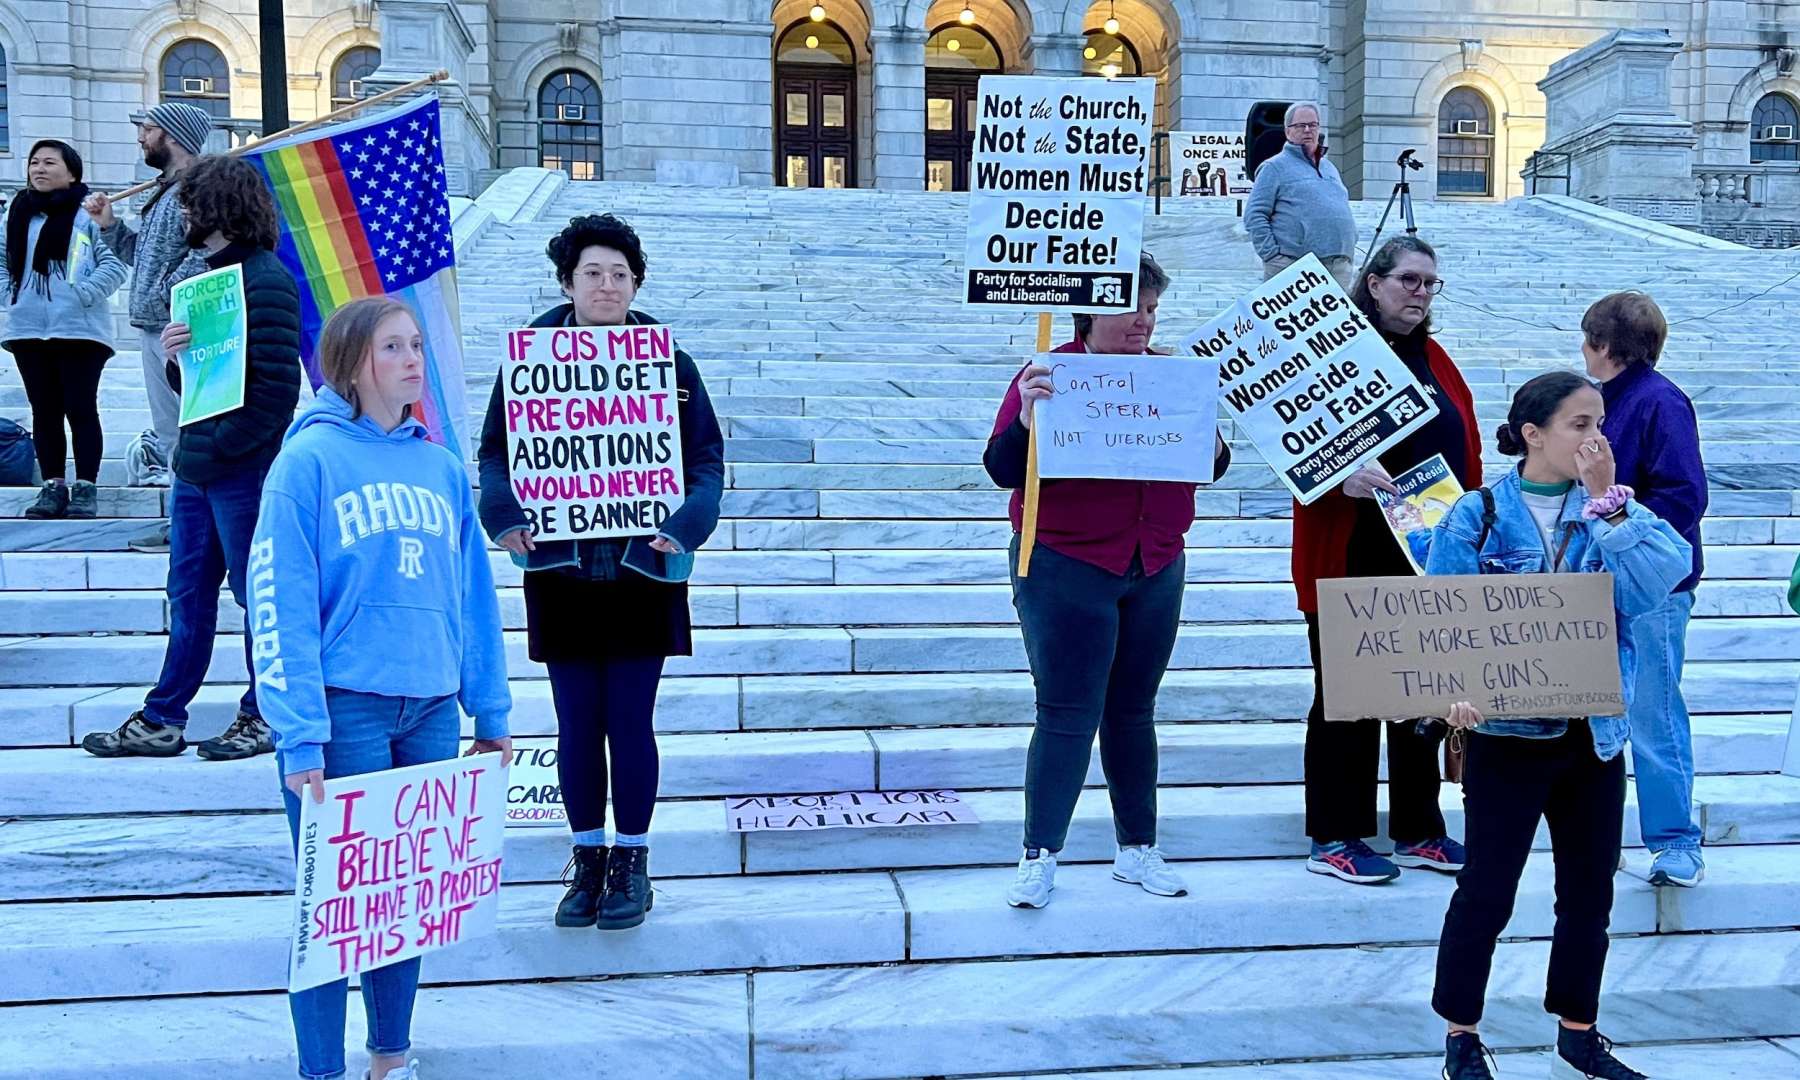 Rhode Island rallies in response to leaked Supreme Court abortion decision